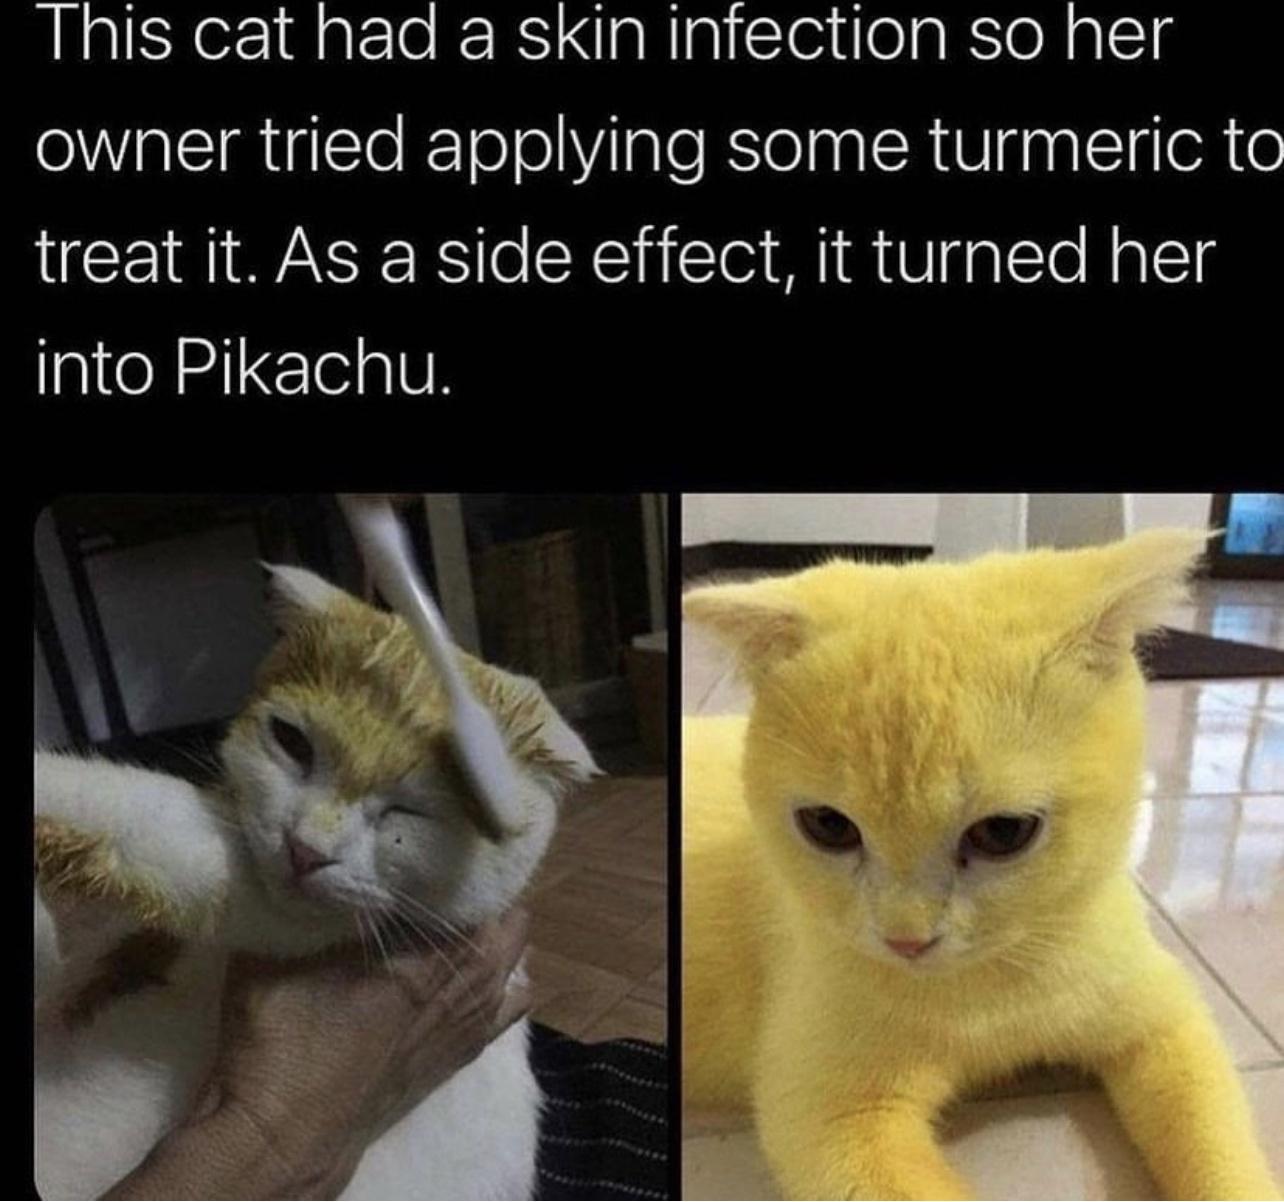 funny memes and pics - turmeric cat meme - This cat had a skin infection so her owner tried applying some turmeric to treat it. As a side effect, it turned her into Pikachu.